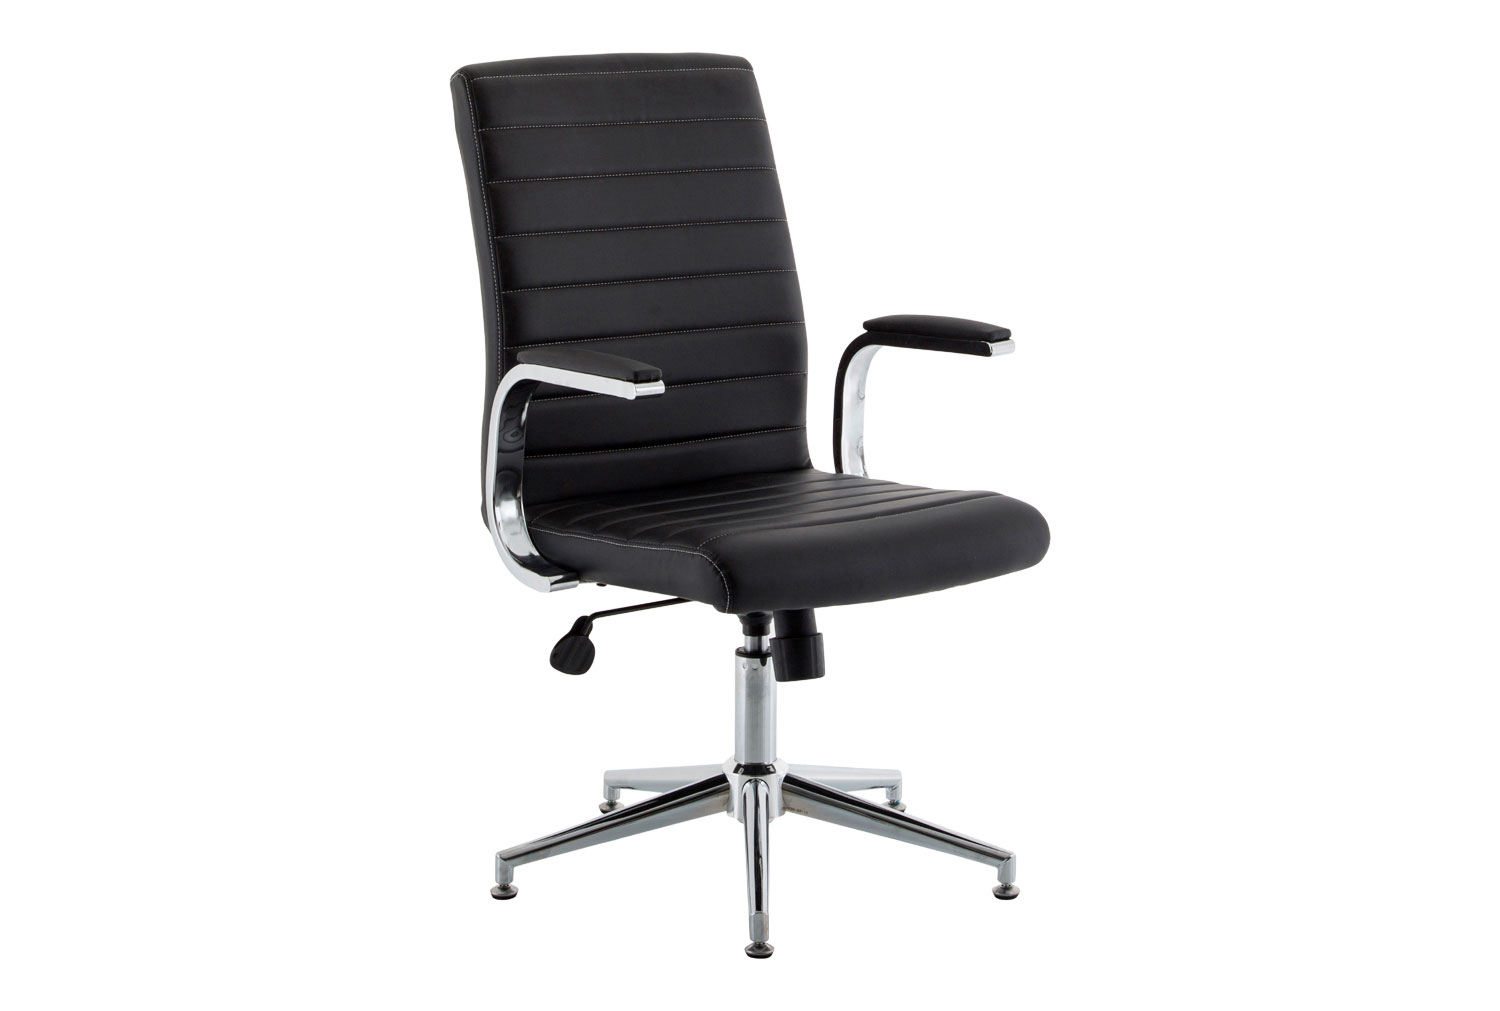 Wexford Executive Bonded Leather Office Chair With Glides (Brown), Express Delivery